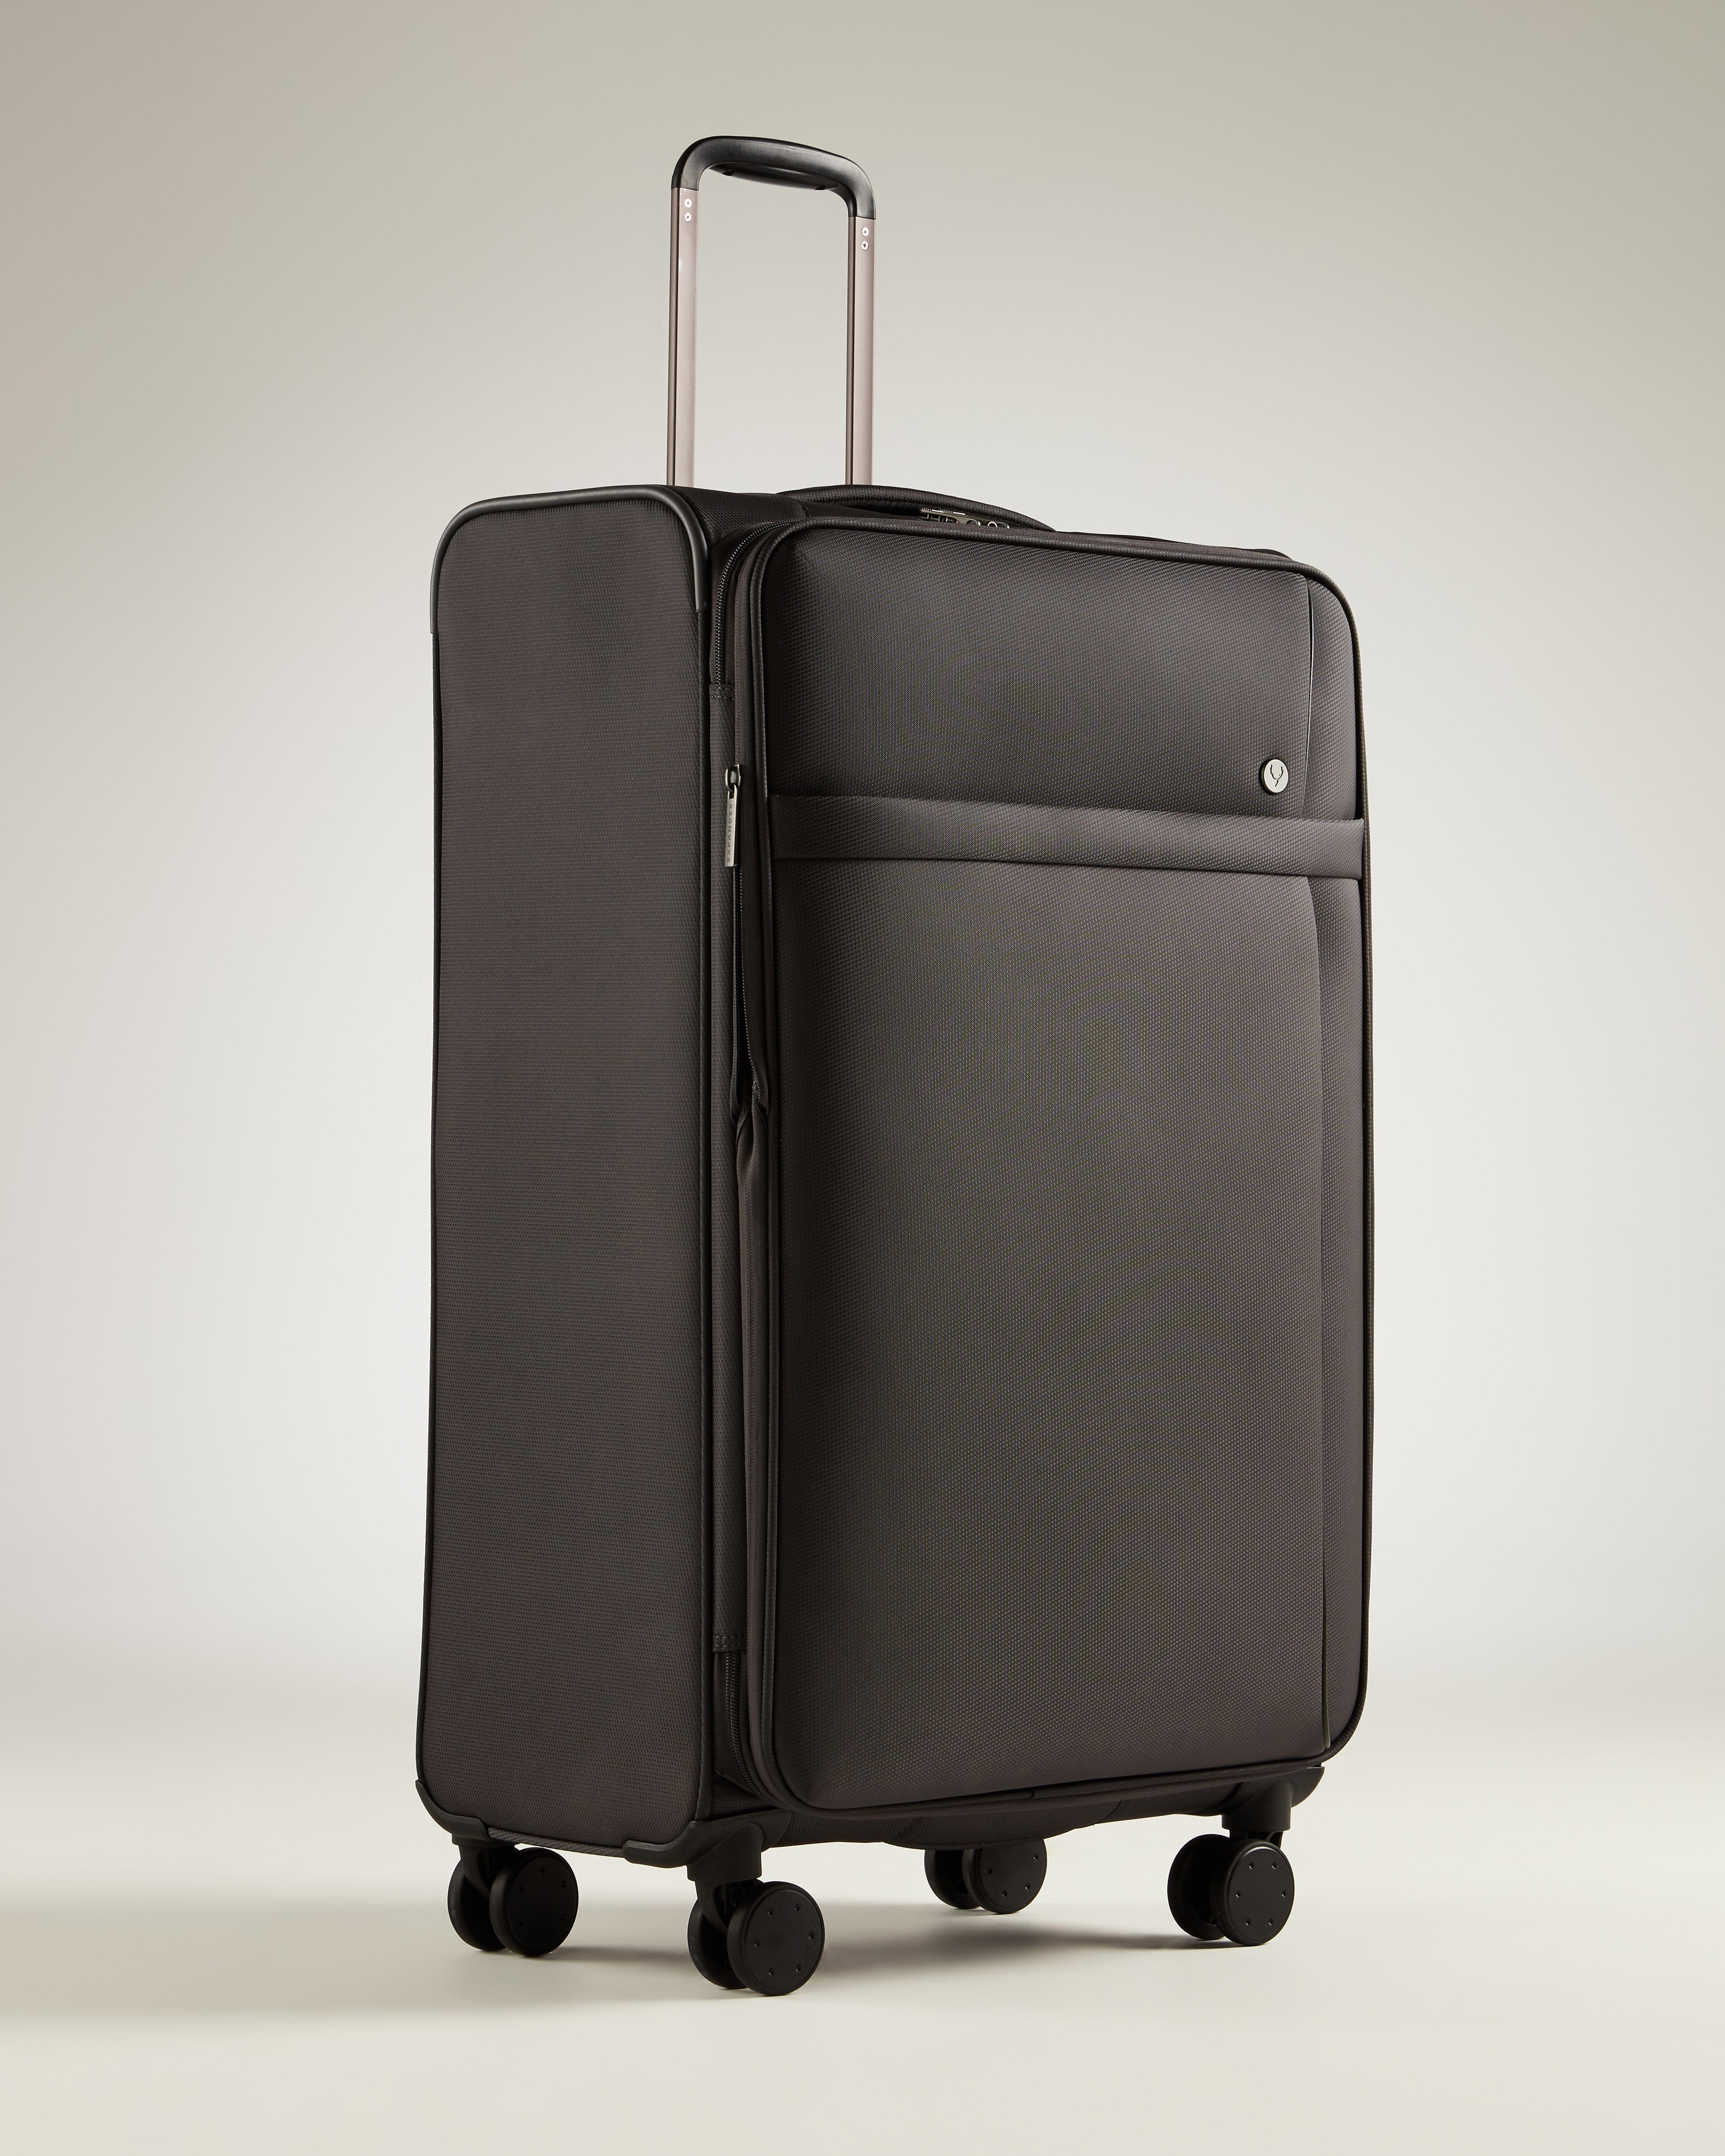 View Antler Prestwick Large Suitcase In Grey Size 83 x 465 x 31 cm information